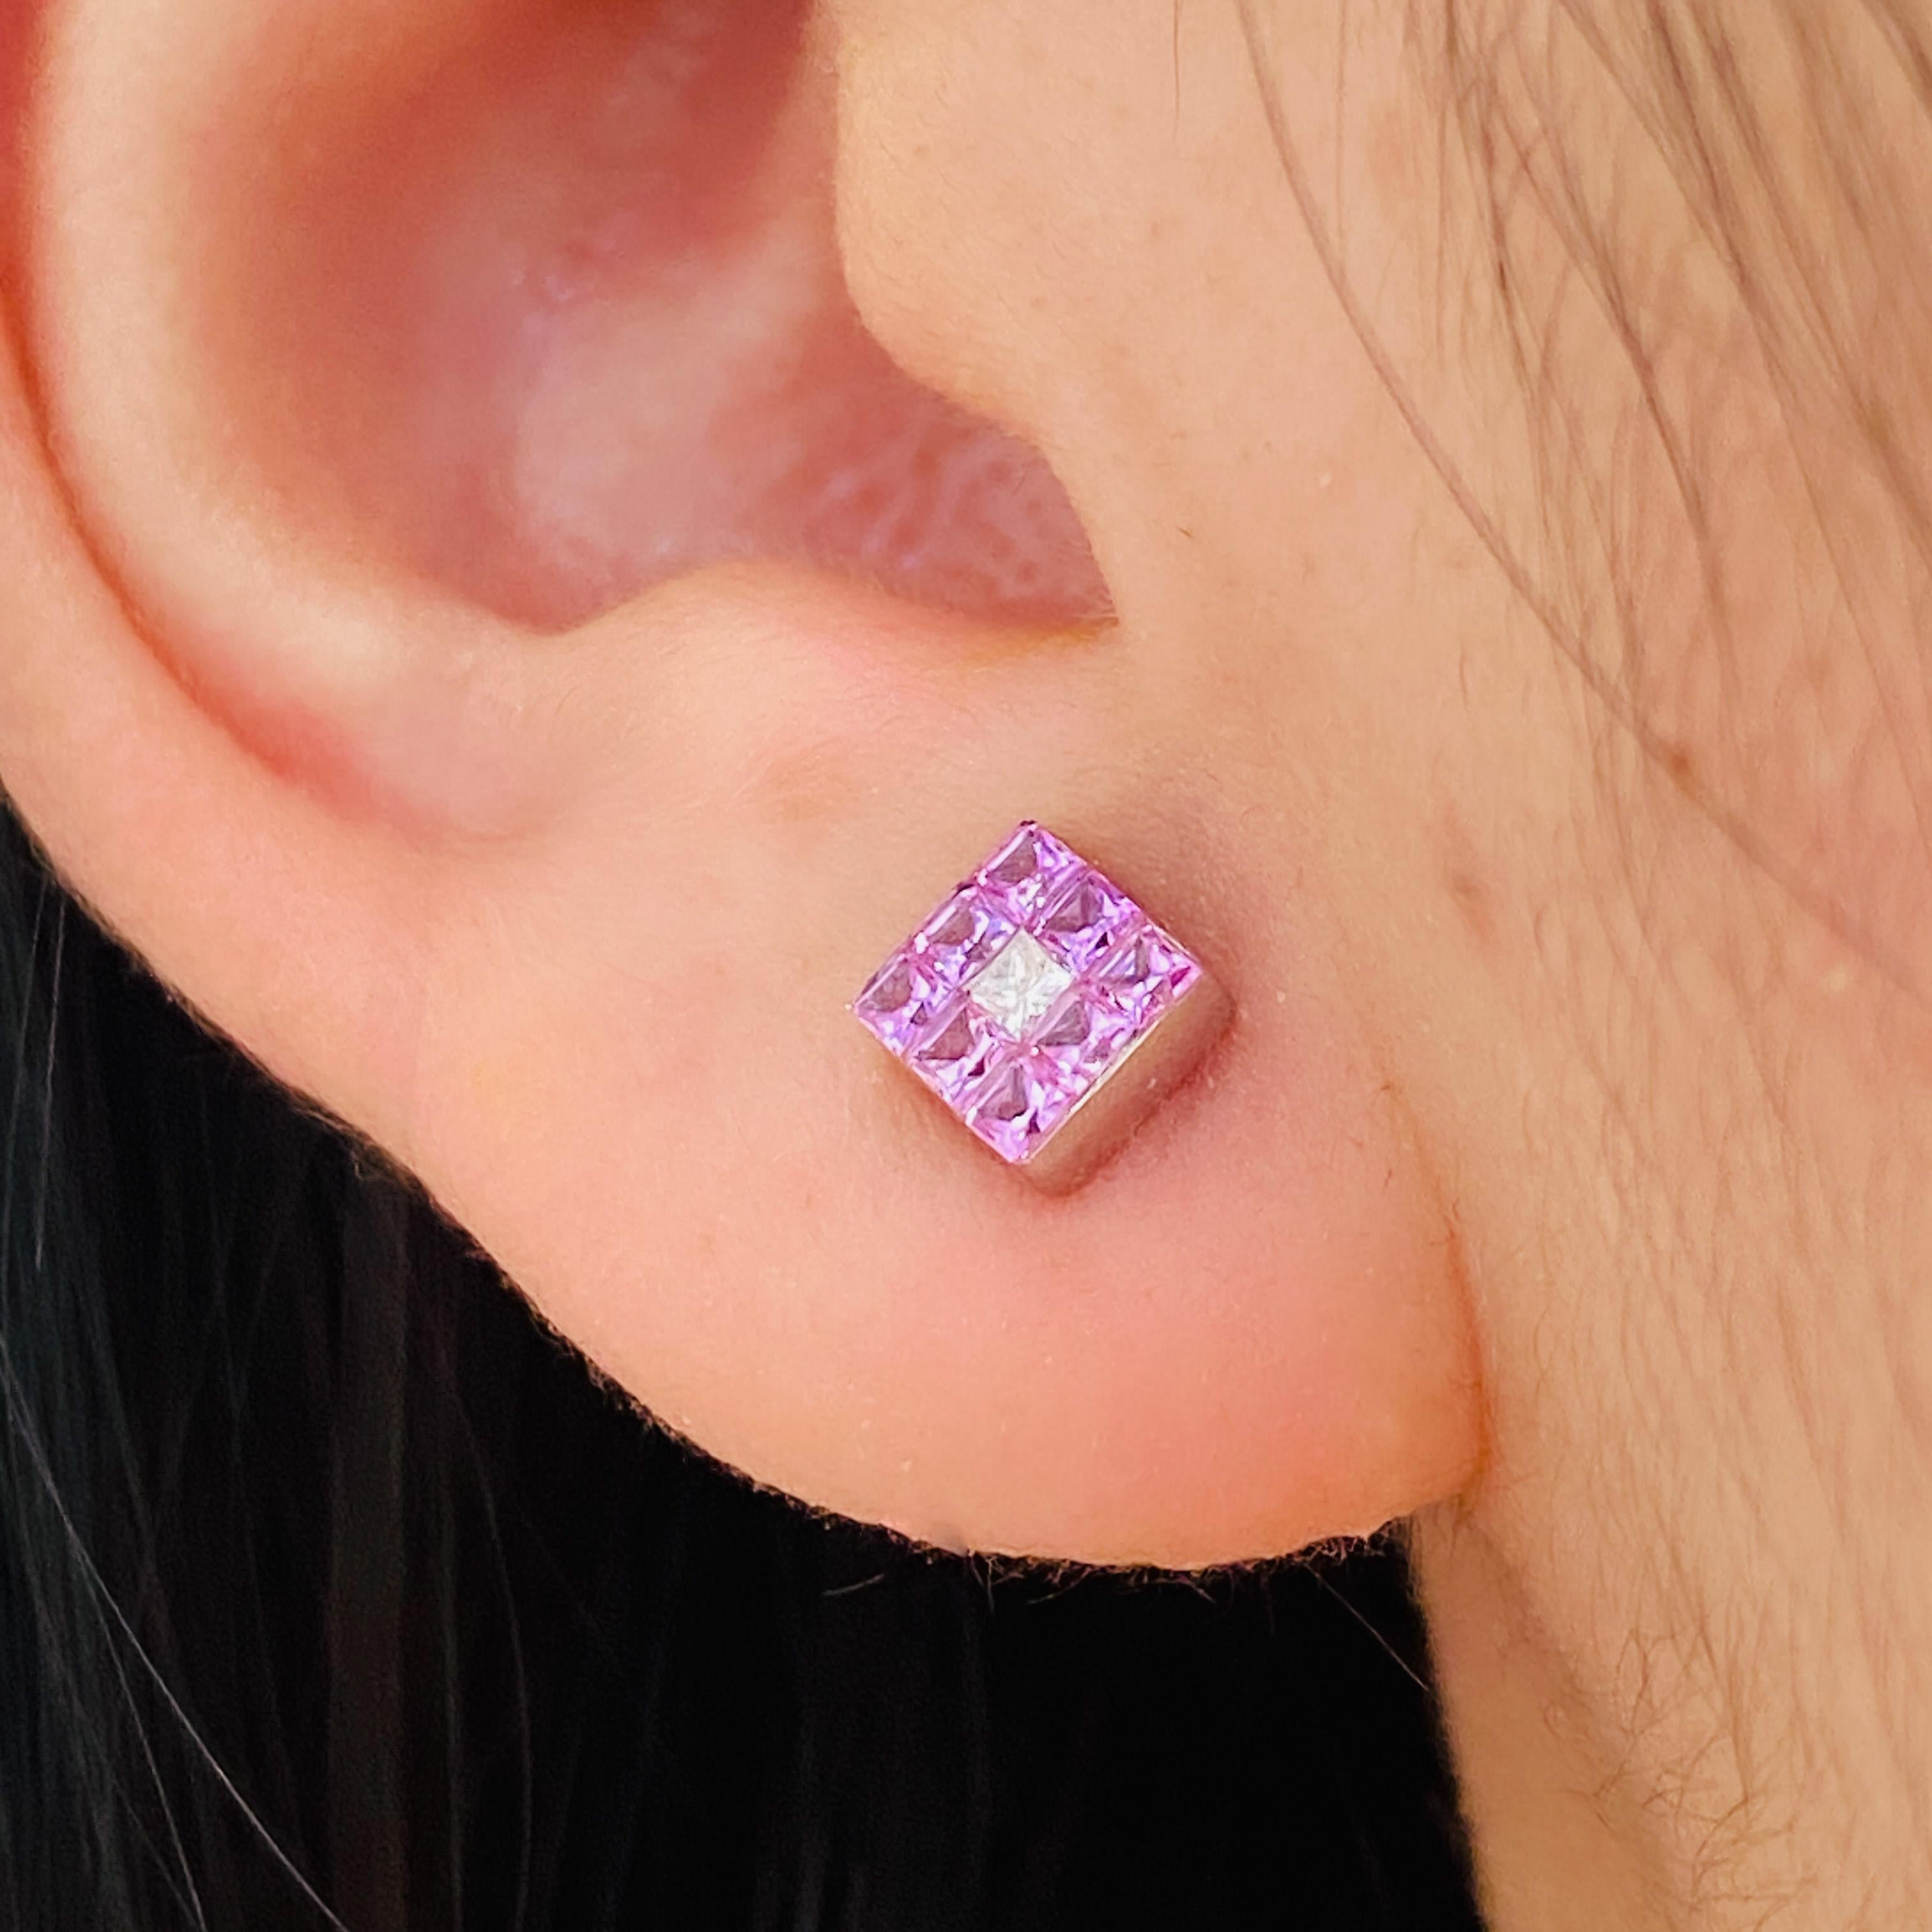 Pink sapphires shine brightly in these adorable little studs accented by a sparkling diamond at their center. Pink is the color most often associated with charm, politeness, sensitivity, tenderness, sweetness, childhood, femininity and the romantic.